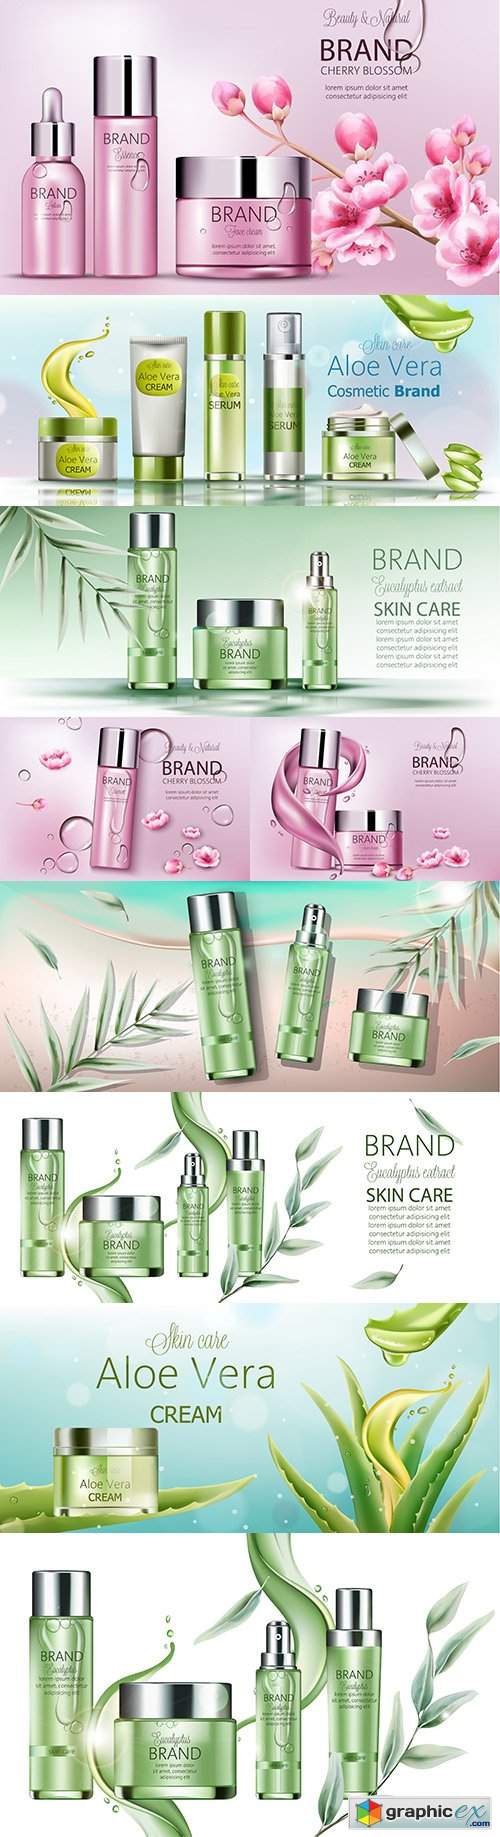  Body cosmetics set Brand name with place for text 3d illustration 3 